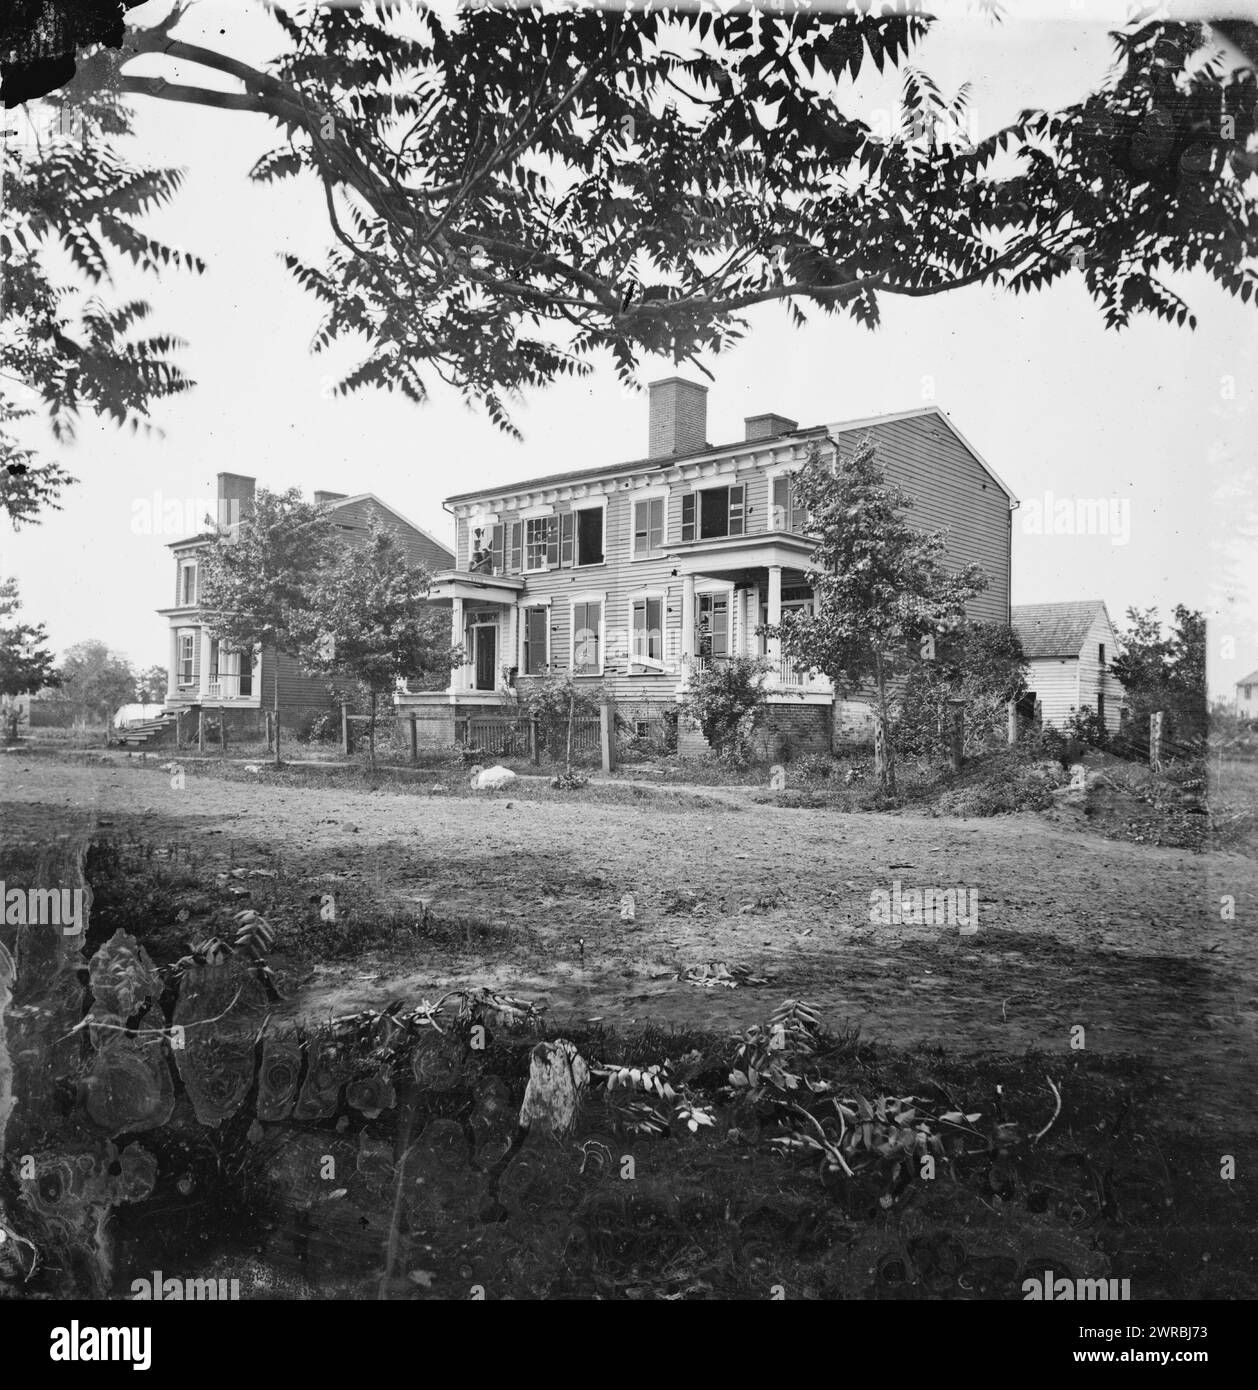 Fredericksburg, Va. Houses damaged by the shelling of December 13, 1862, Photograph from the main eastern theater of the war, Burnside and Hooker, November 1862-April 1863., Gardner, James, 1832-, photographer, 1864 May 19, United States, History, Civil War, 1861-1865, Glass negatives, 1860-1870, Stereographs, 1860-1870, 1 negative: glass, stereograph, wet collodion, 4 x 10 in Stock Photo